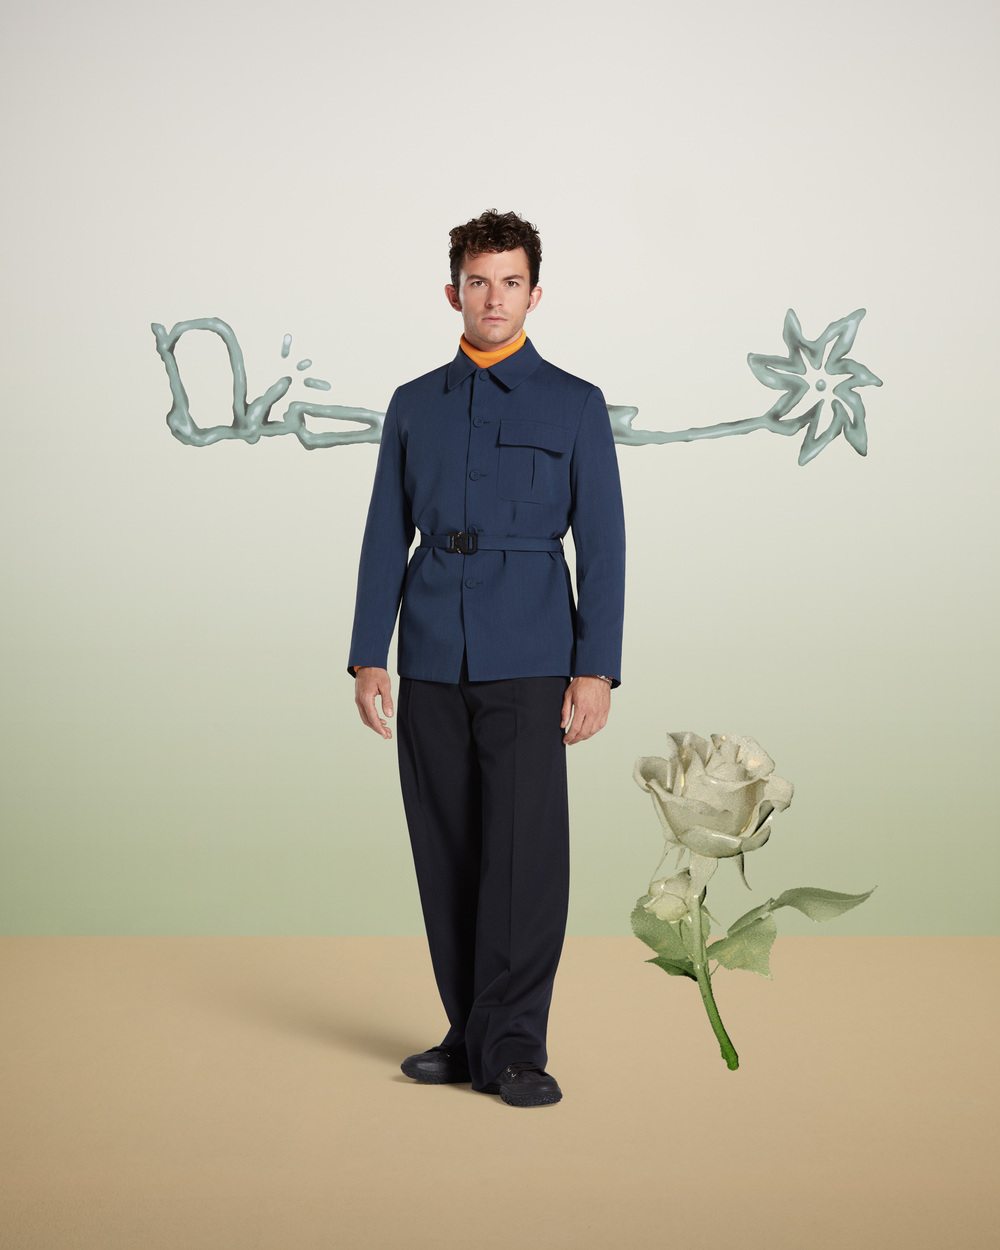 Jonathan Bailey wearing the Cactus Jack Dior collection 